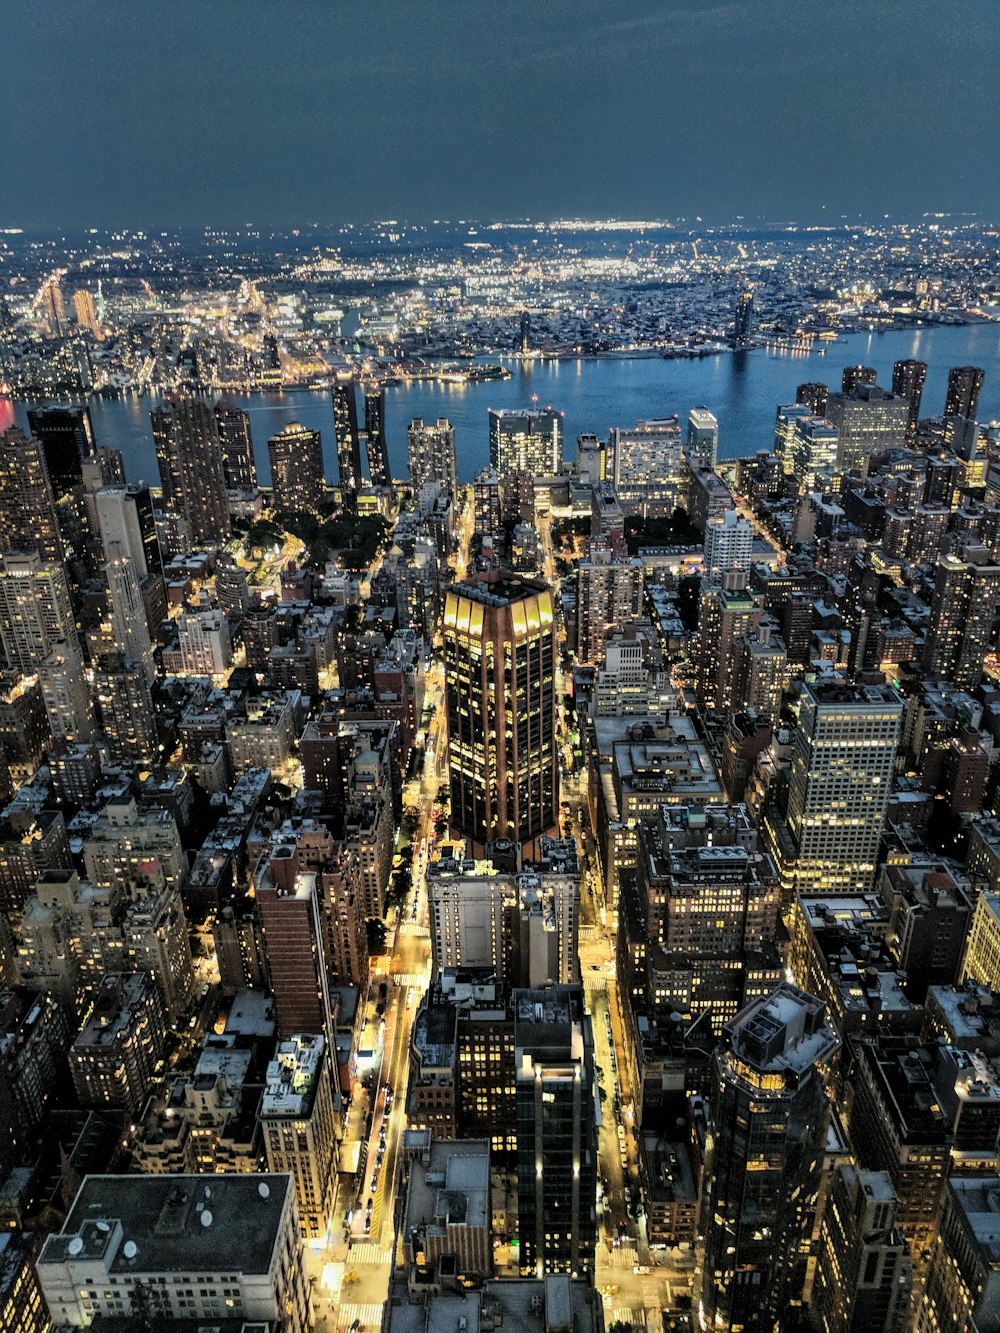 areal view of city at nighttime